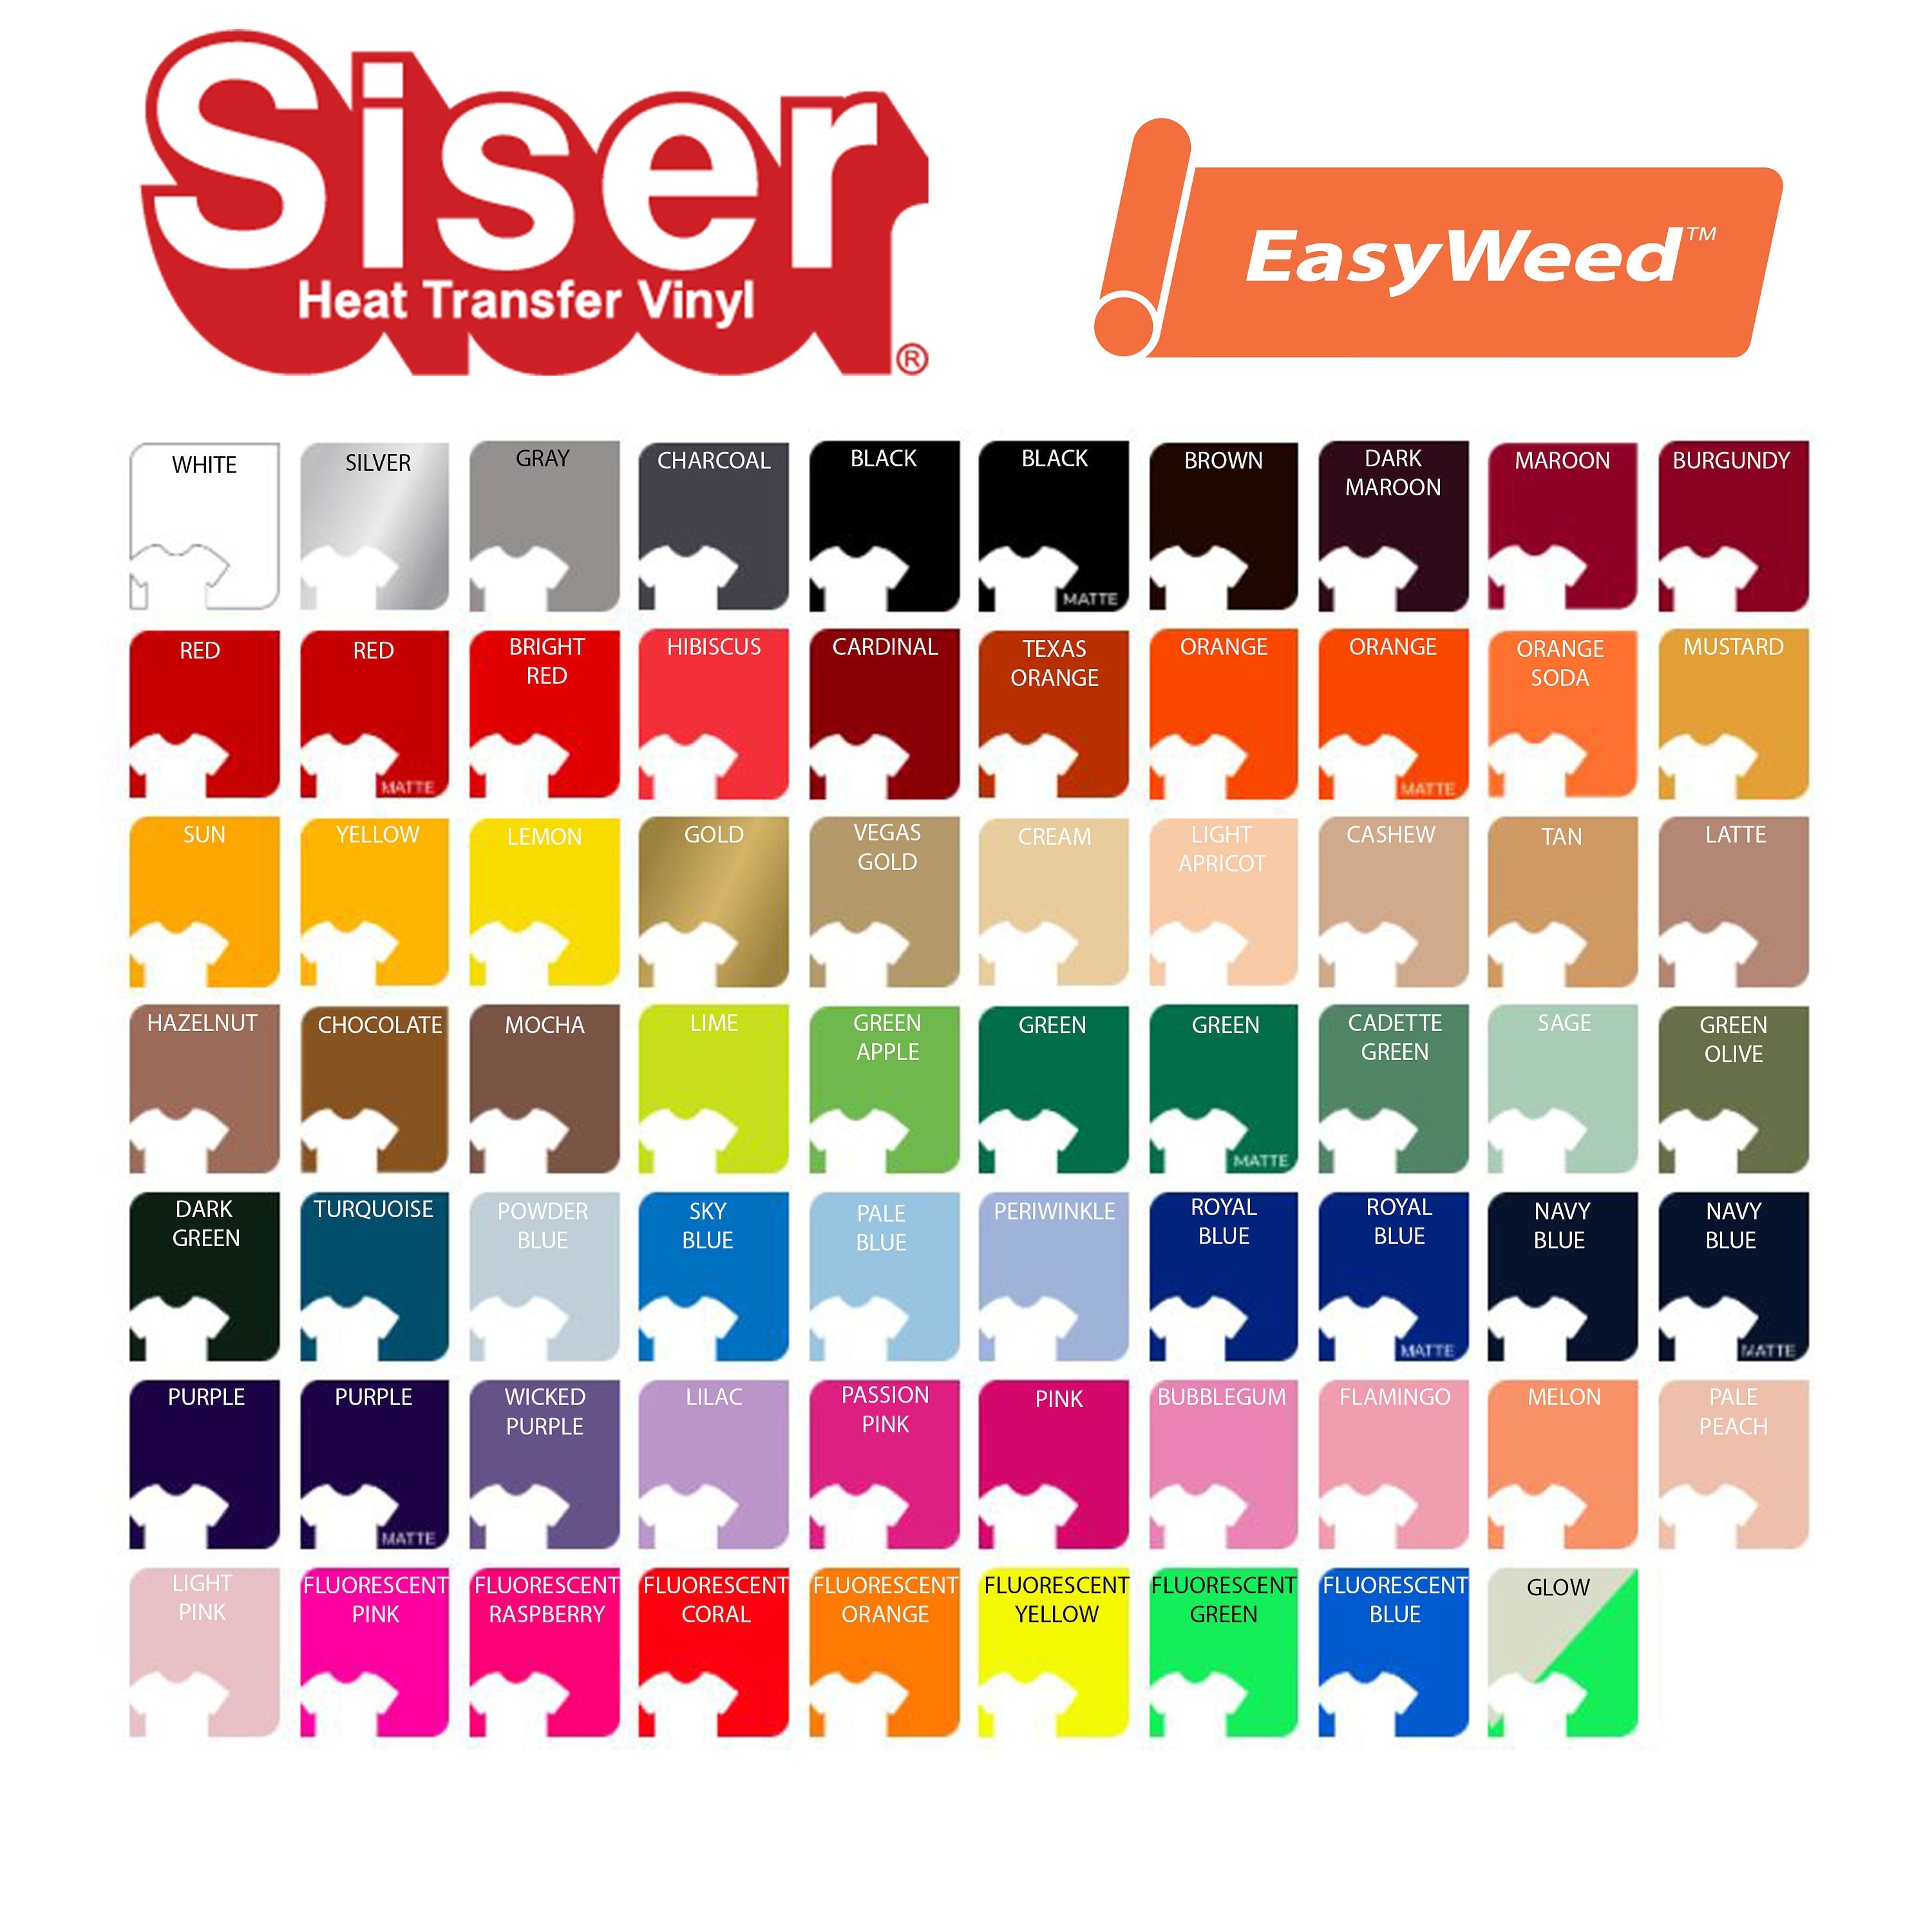 40 Sheet Pack Siser EasyWeed HTV! You Pick The Colors 12x15 Sheets Iro